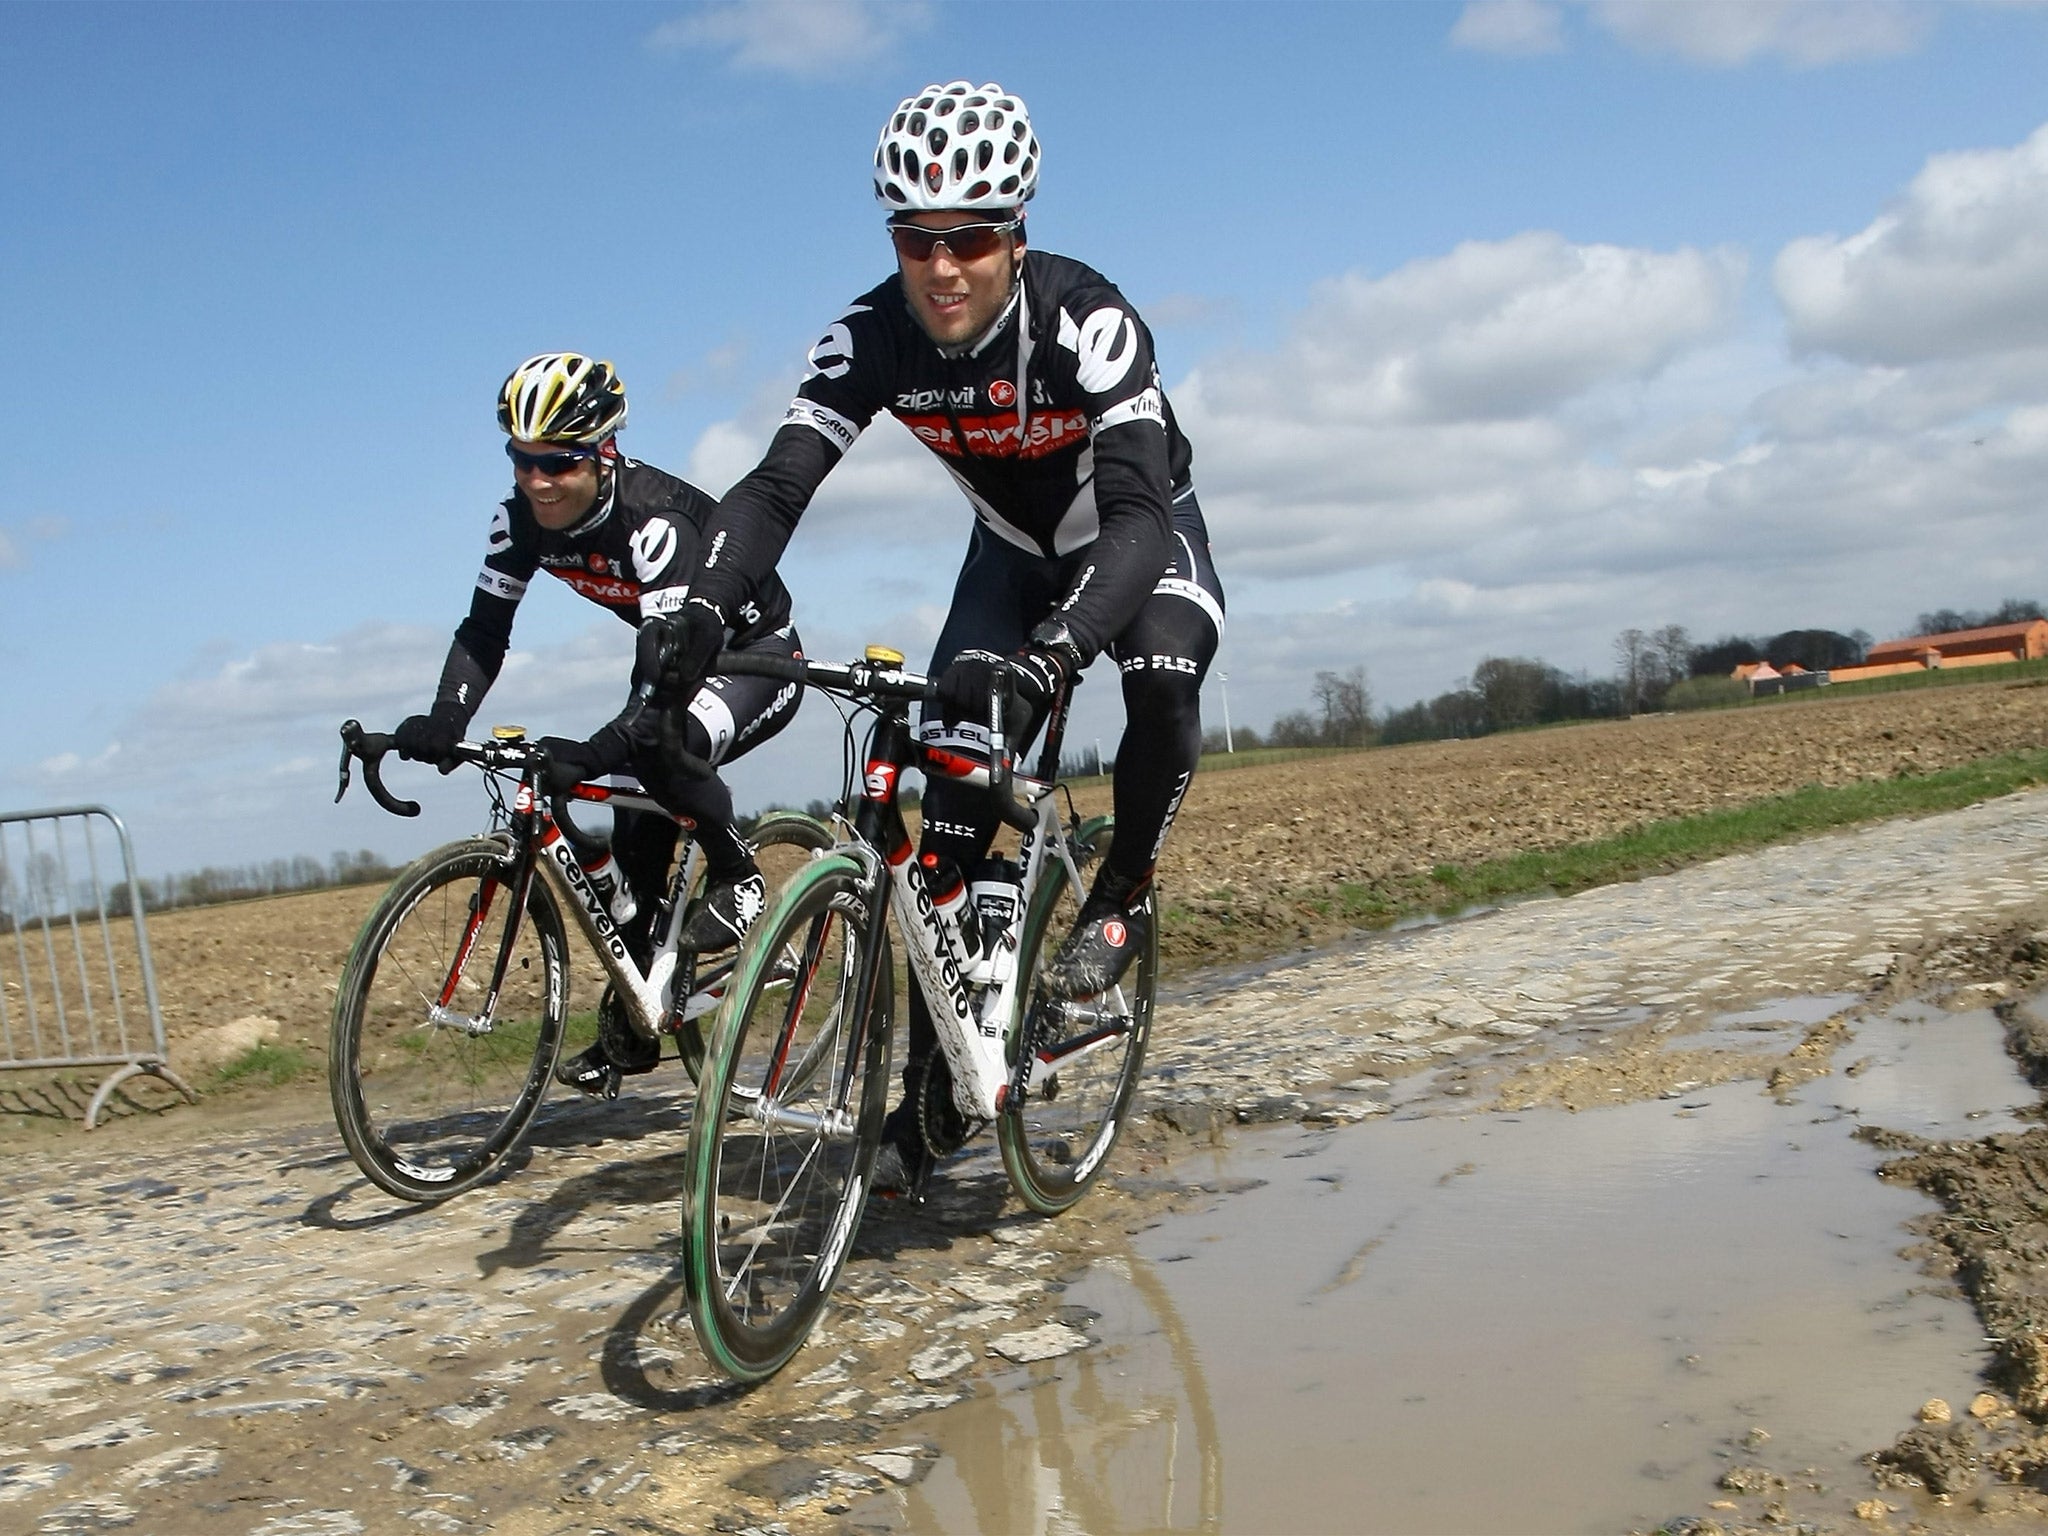 Roger Hammond (left) and Thor Hushovd ride over the cobbles during a Paris-Roubaix training session